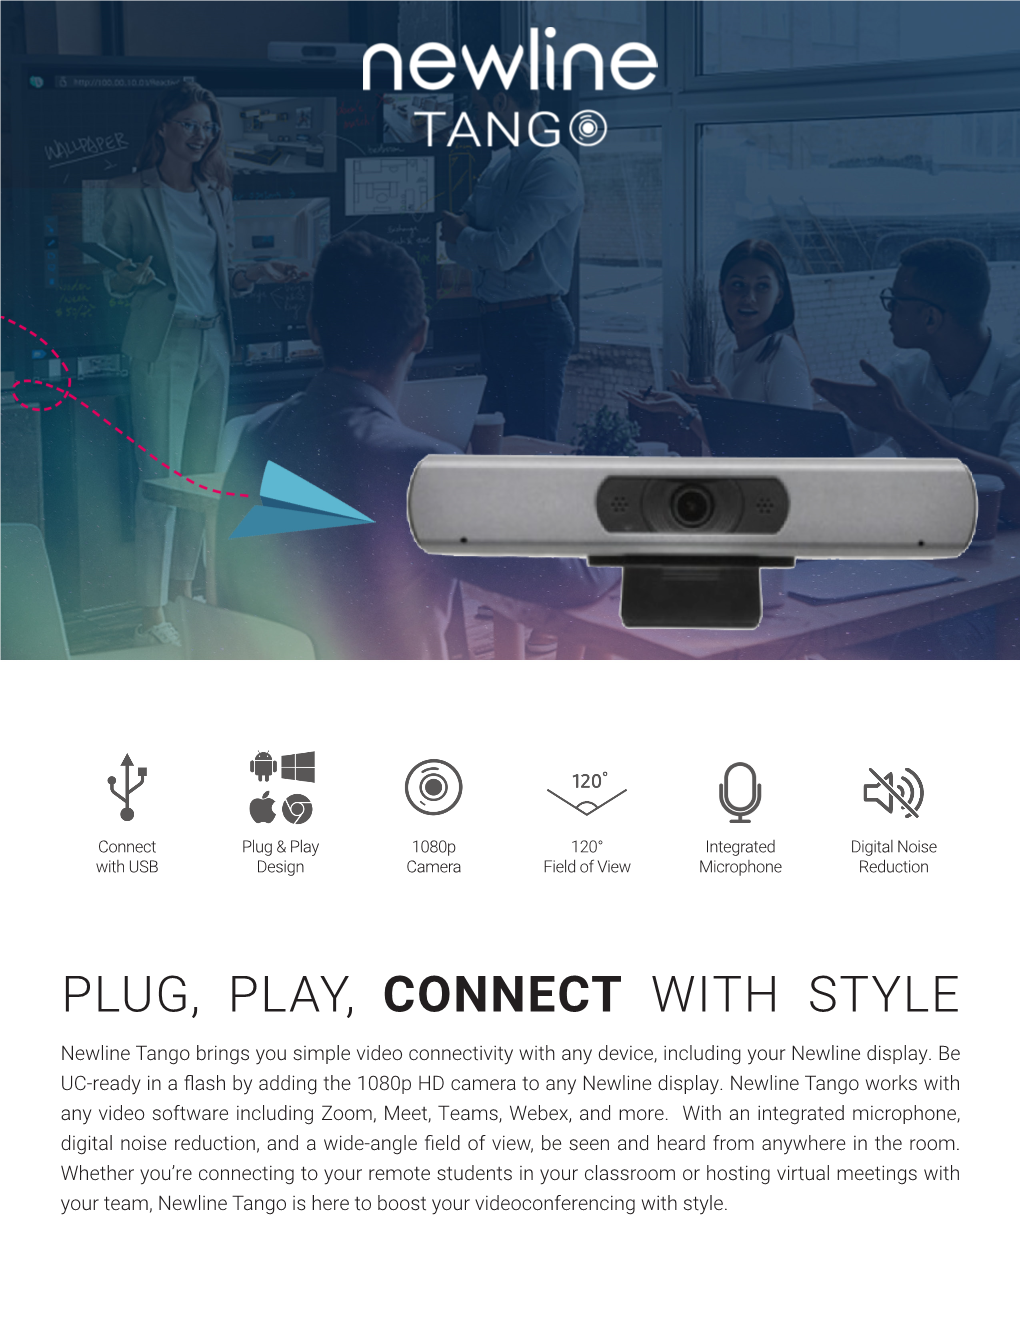 Plug, Play, Connect with Style